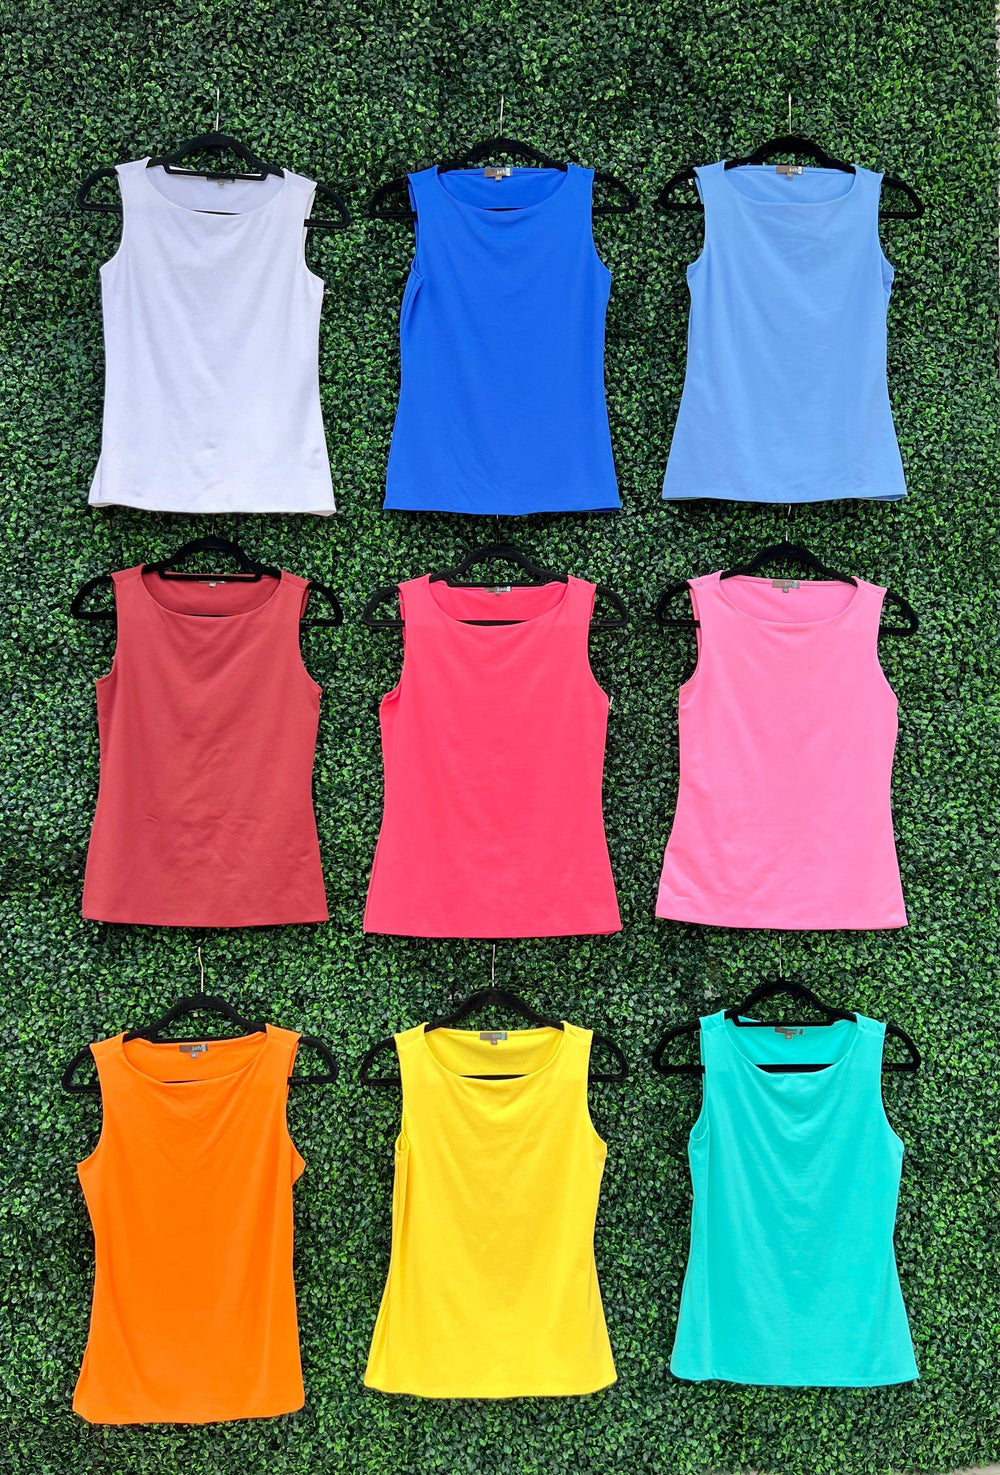 Tres Chic dress boutique tank tops for layering